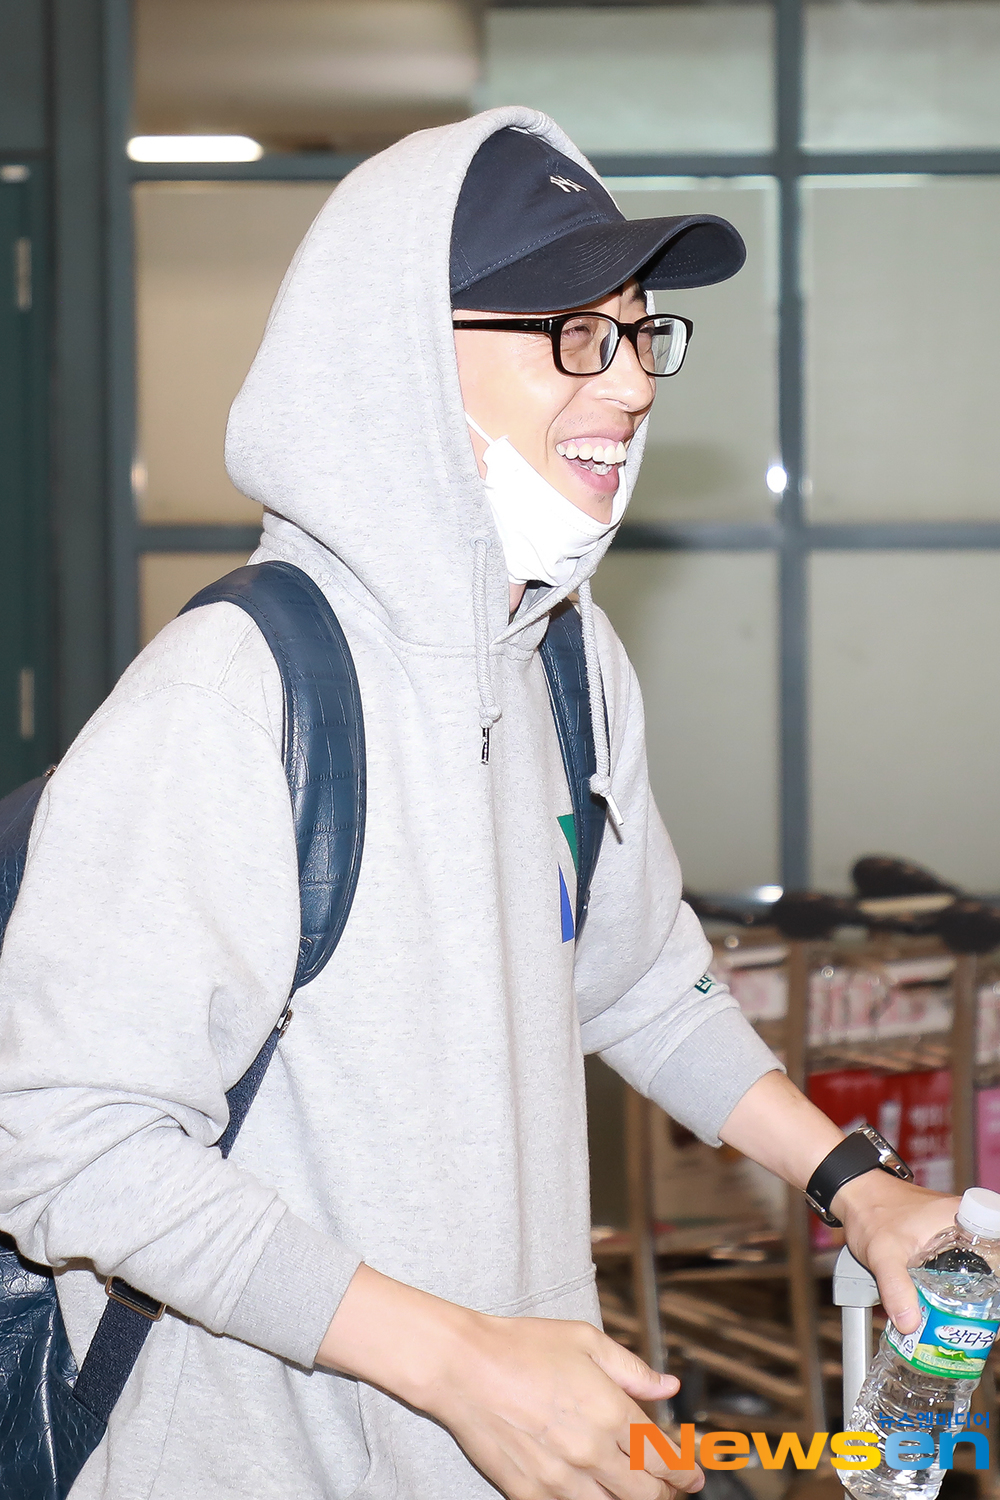 Broadcaster Yoo Jae-Suk arrived at the Inchon International Airport in Unseo-dong, Jung-gu, Incheon after finishing the overseas schedule of RUNNINGMAN FAN MEETING IN JAKARTA INDONESIA held in Indonesia on the morning of August 18th.Yoo Jae-Suk is leaving the arrivals hall.kim ki-tae